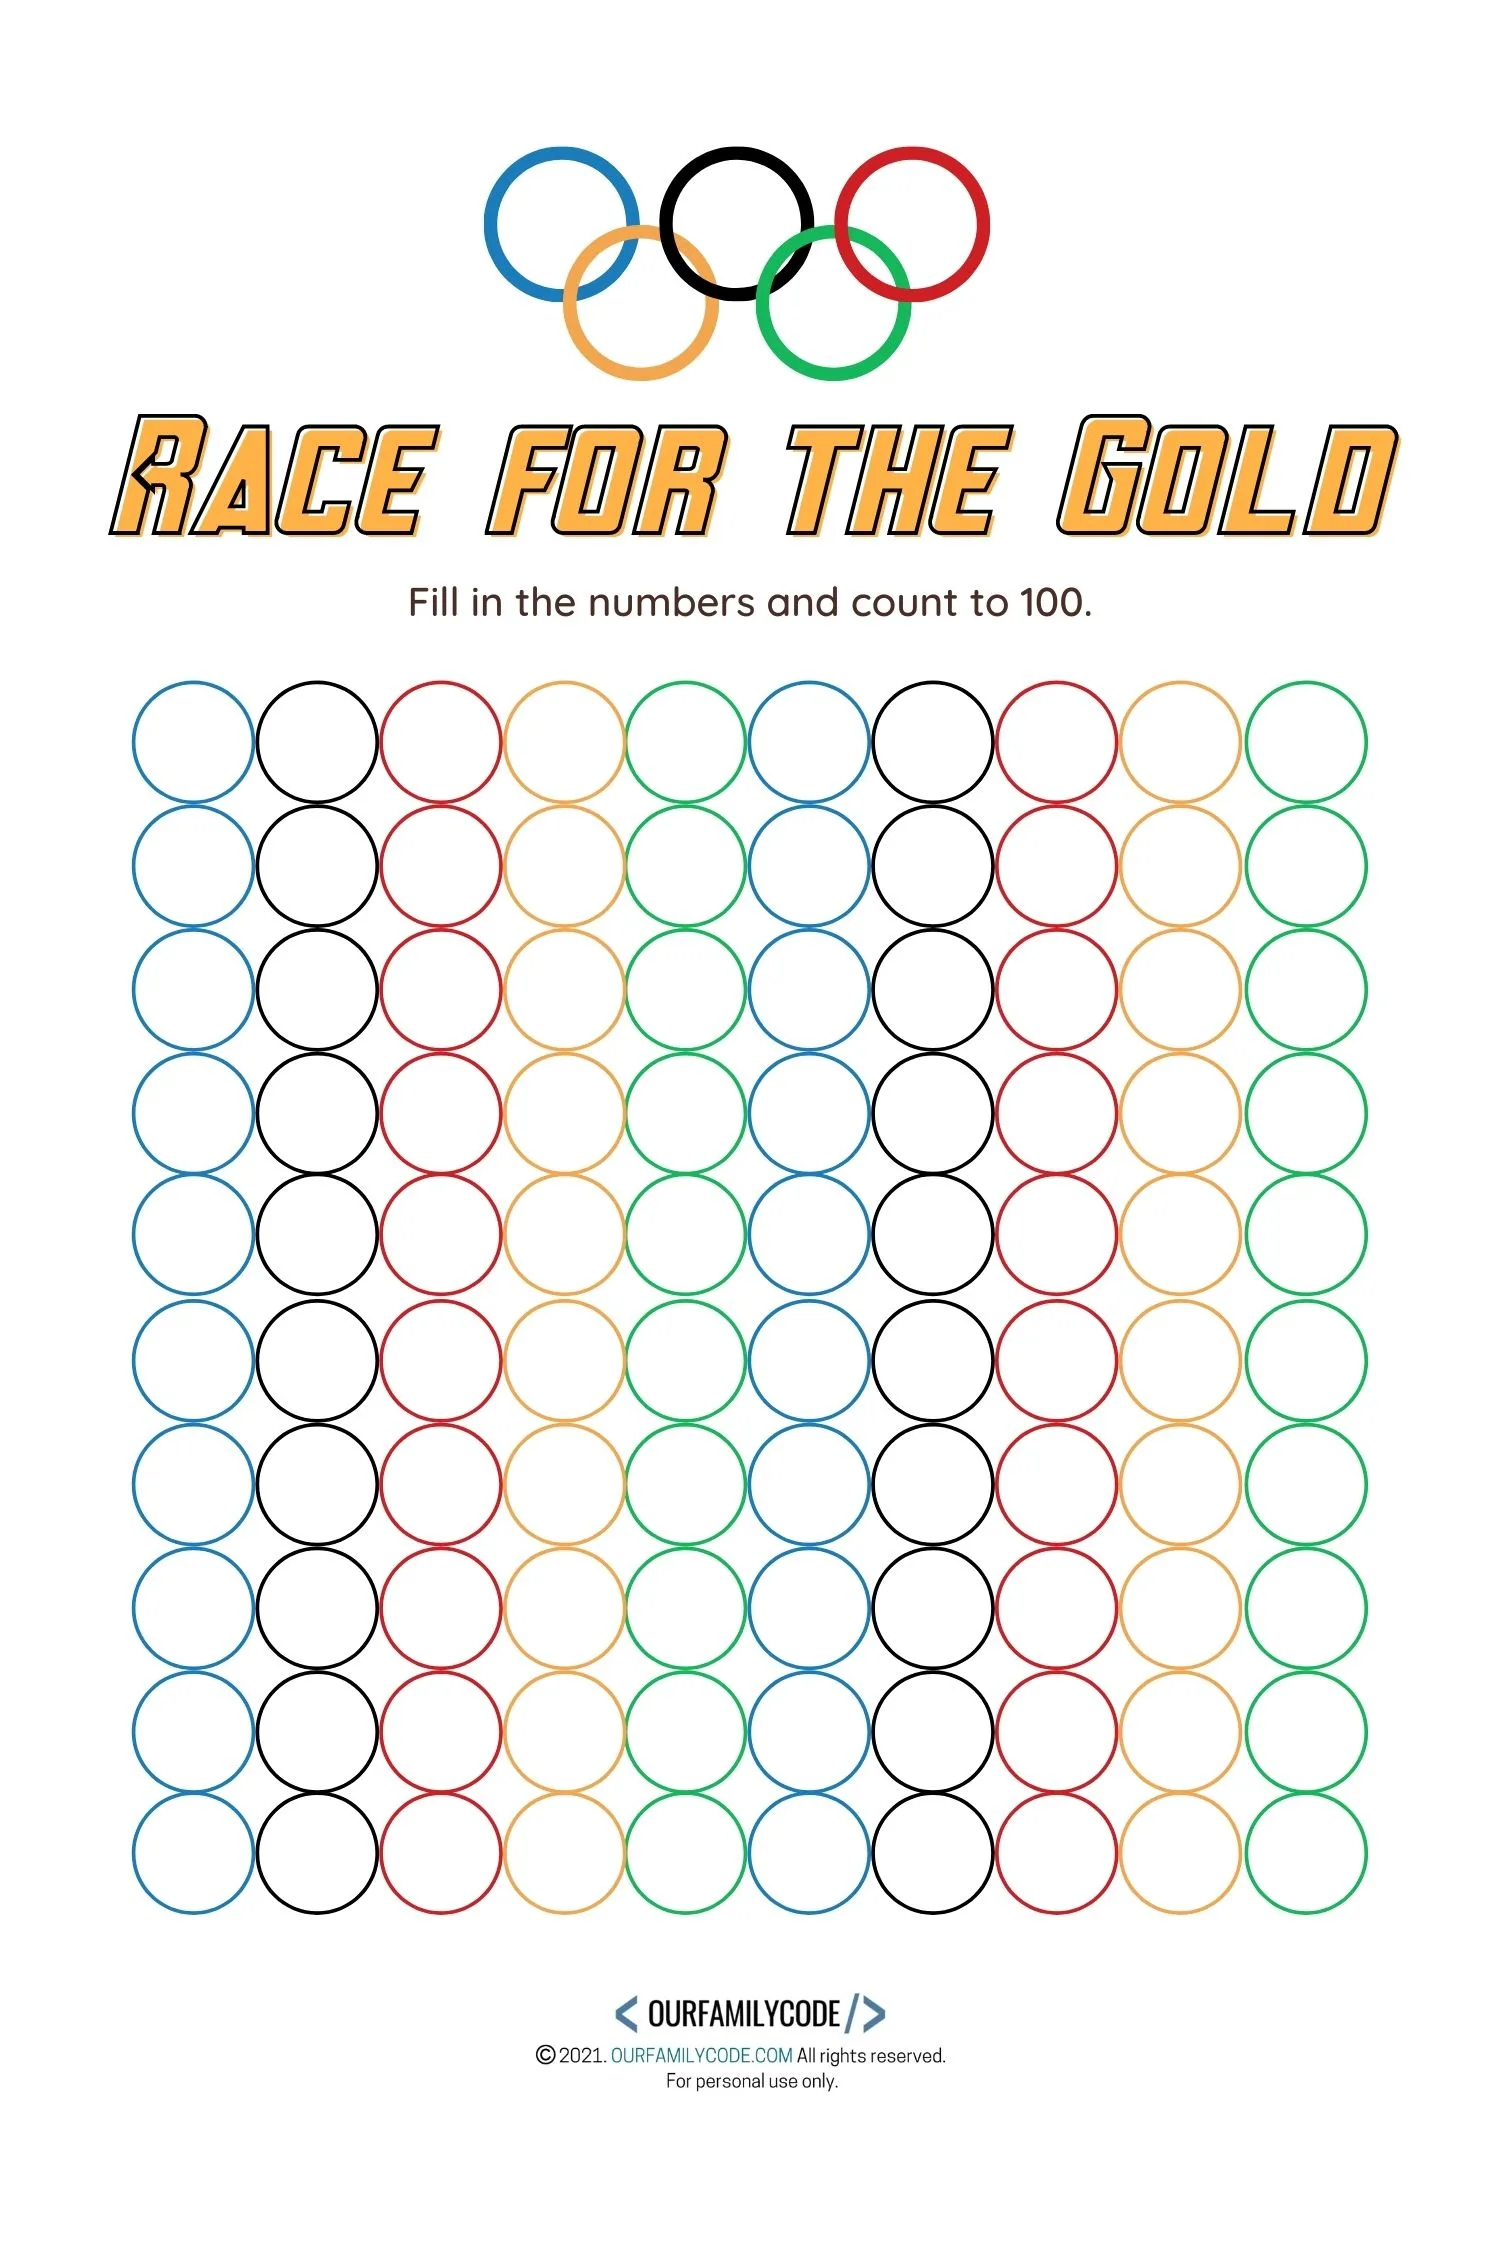 A picture of a blank Olympic hundreds chart with rings to 100 for kids to fill-in to work on math skills.